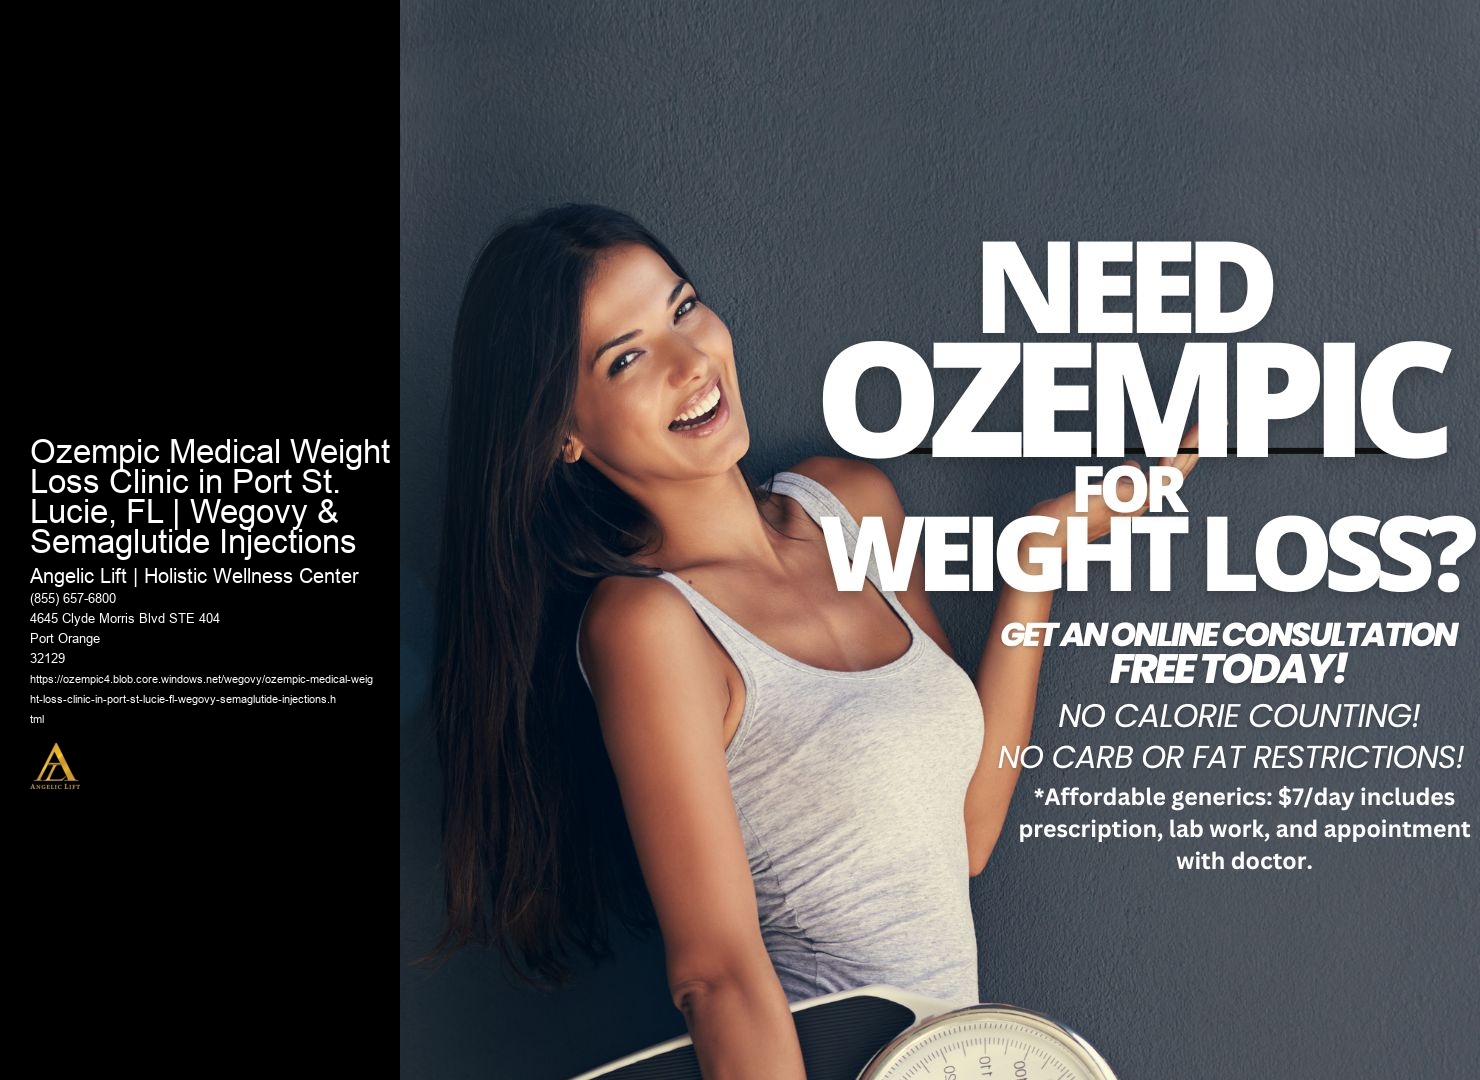 Ozempic Medical Weight Loss Clinic in Port St. Lucie, FL | Wegovy & Semaglutide Injections